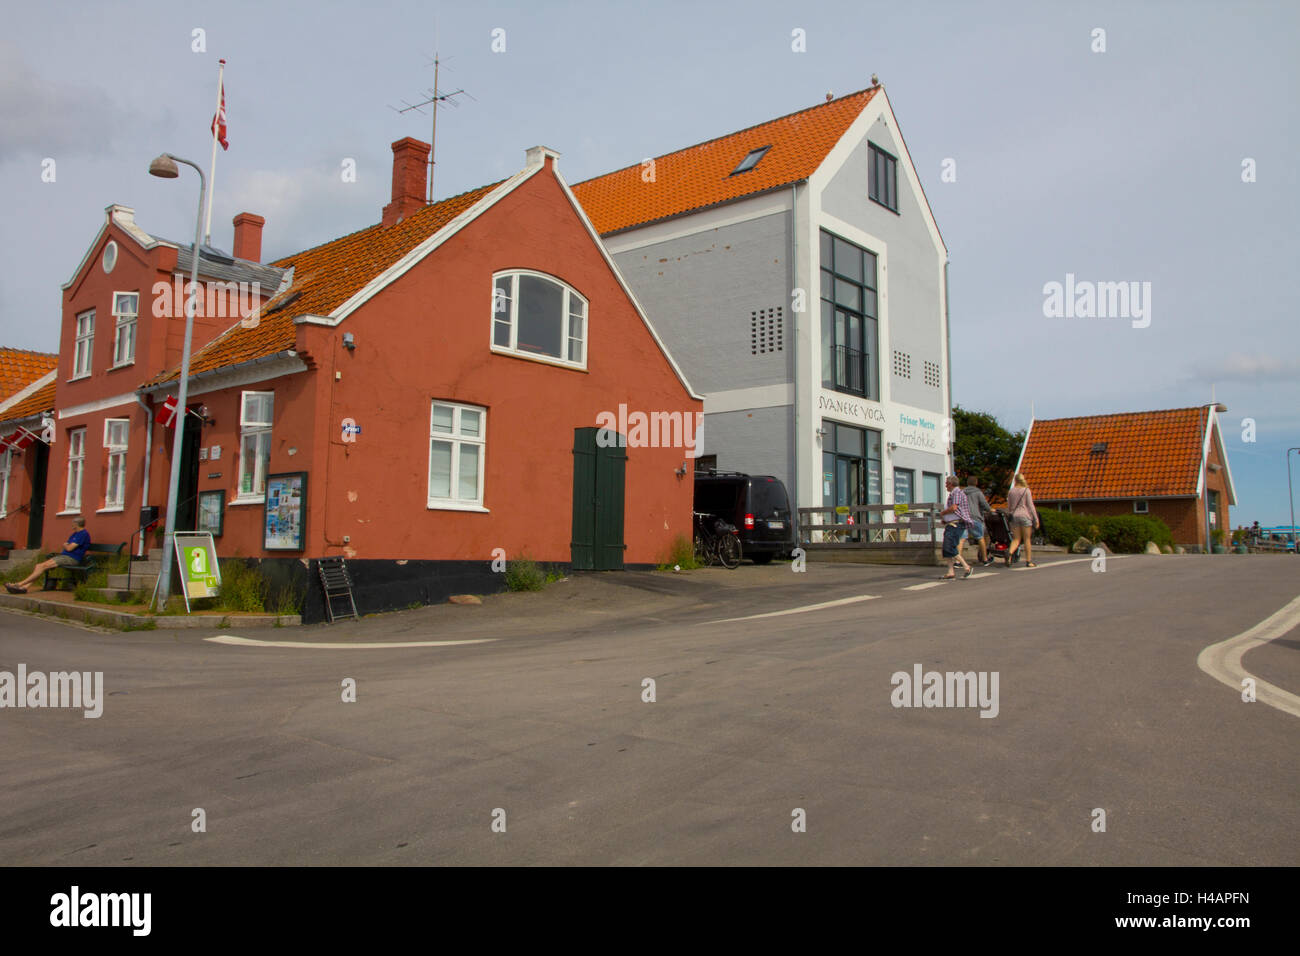 The capital town of Ronne, on the Danish island of Bornholm. Stock Photo